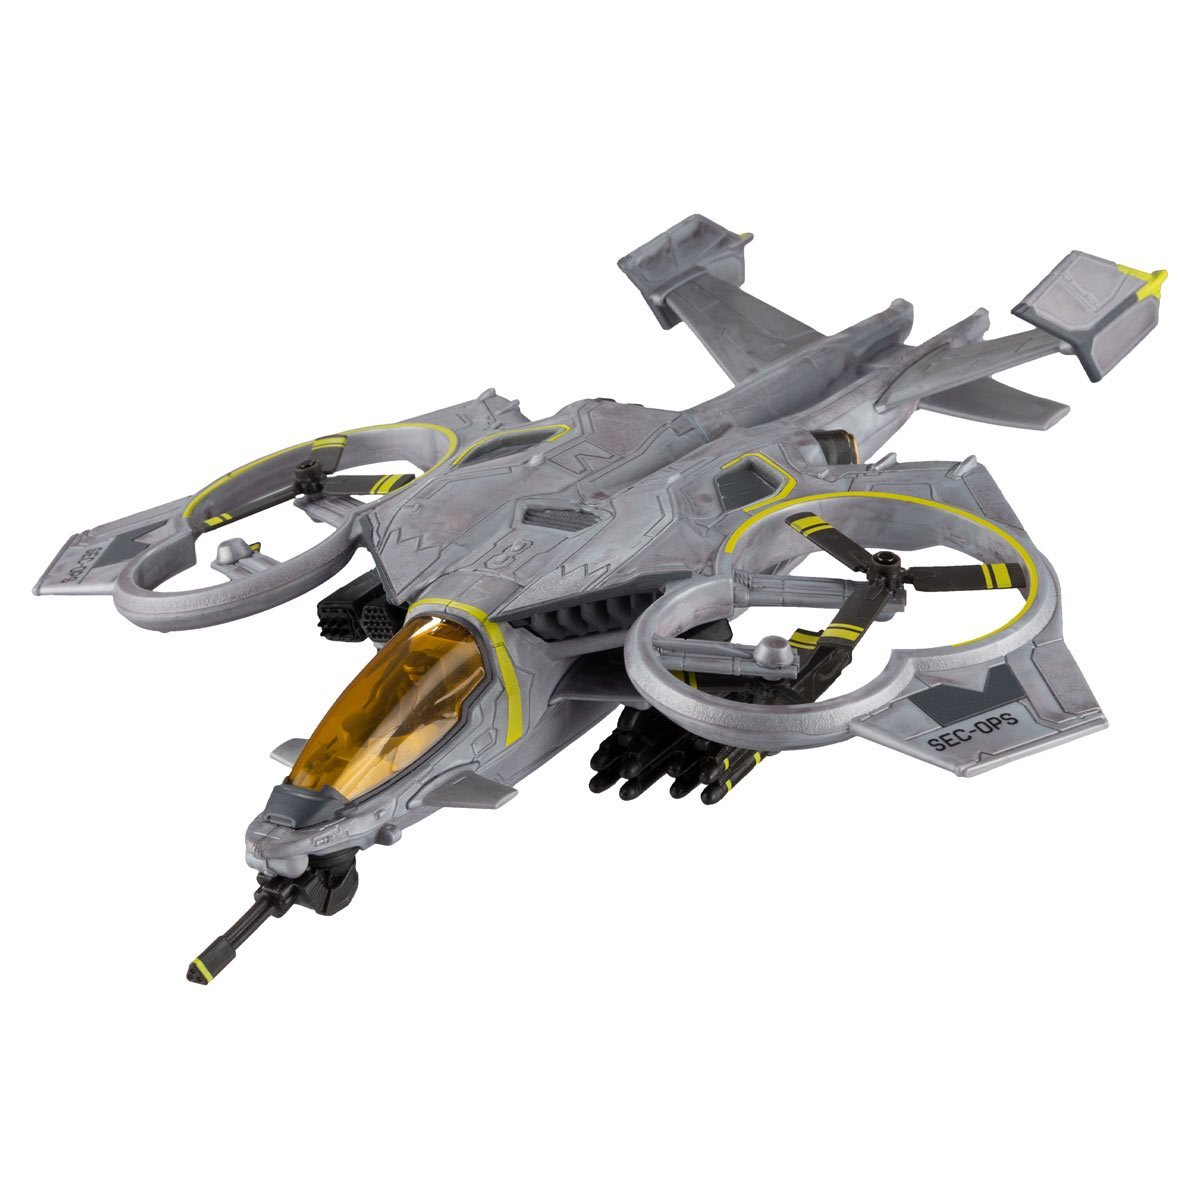 McFarlane Toys  The AT99 Scorpion Gunship large deluxe set is highly  detailed featuring a RDA figure inside the cockpit plus moveable rotor  and wings Available for preorder NOW at select retailers